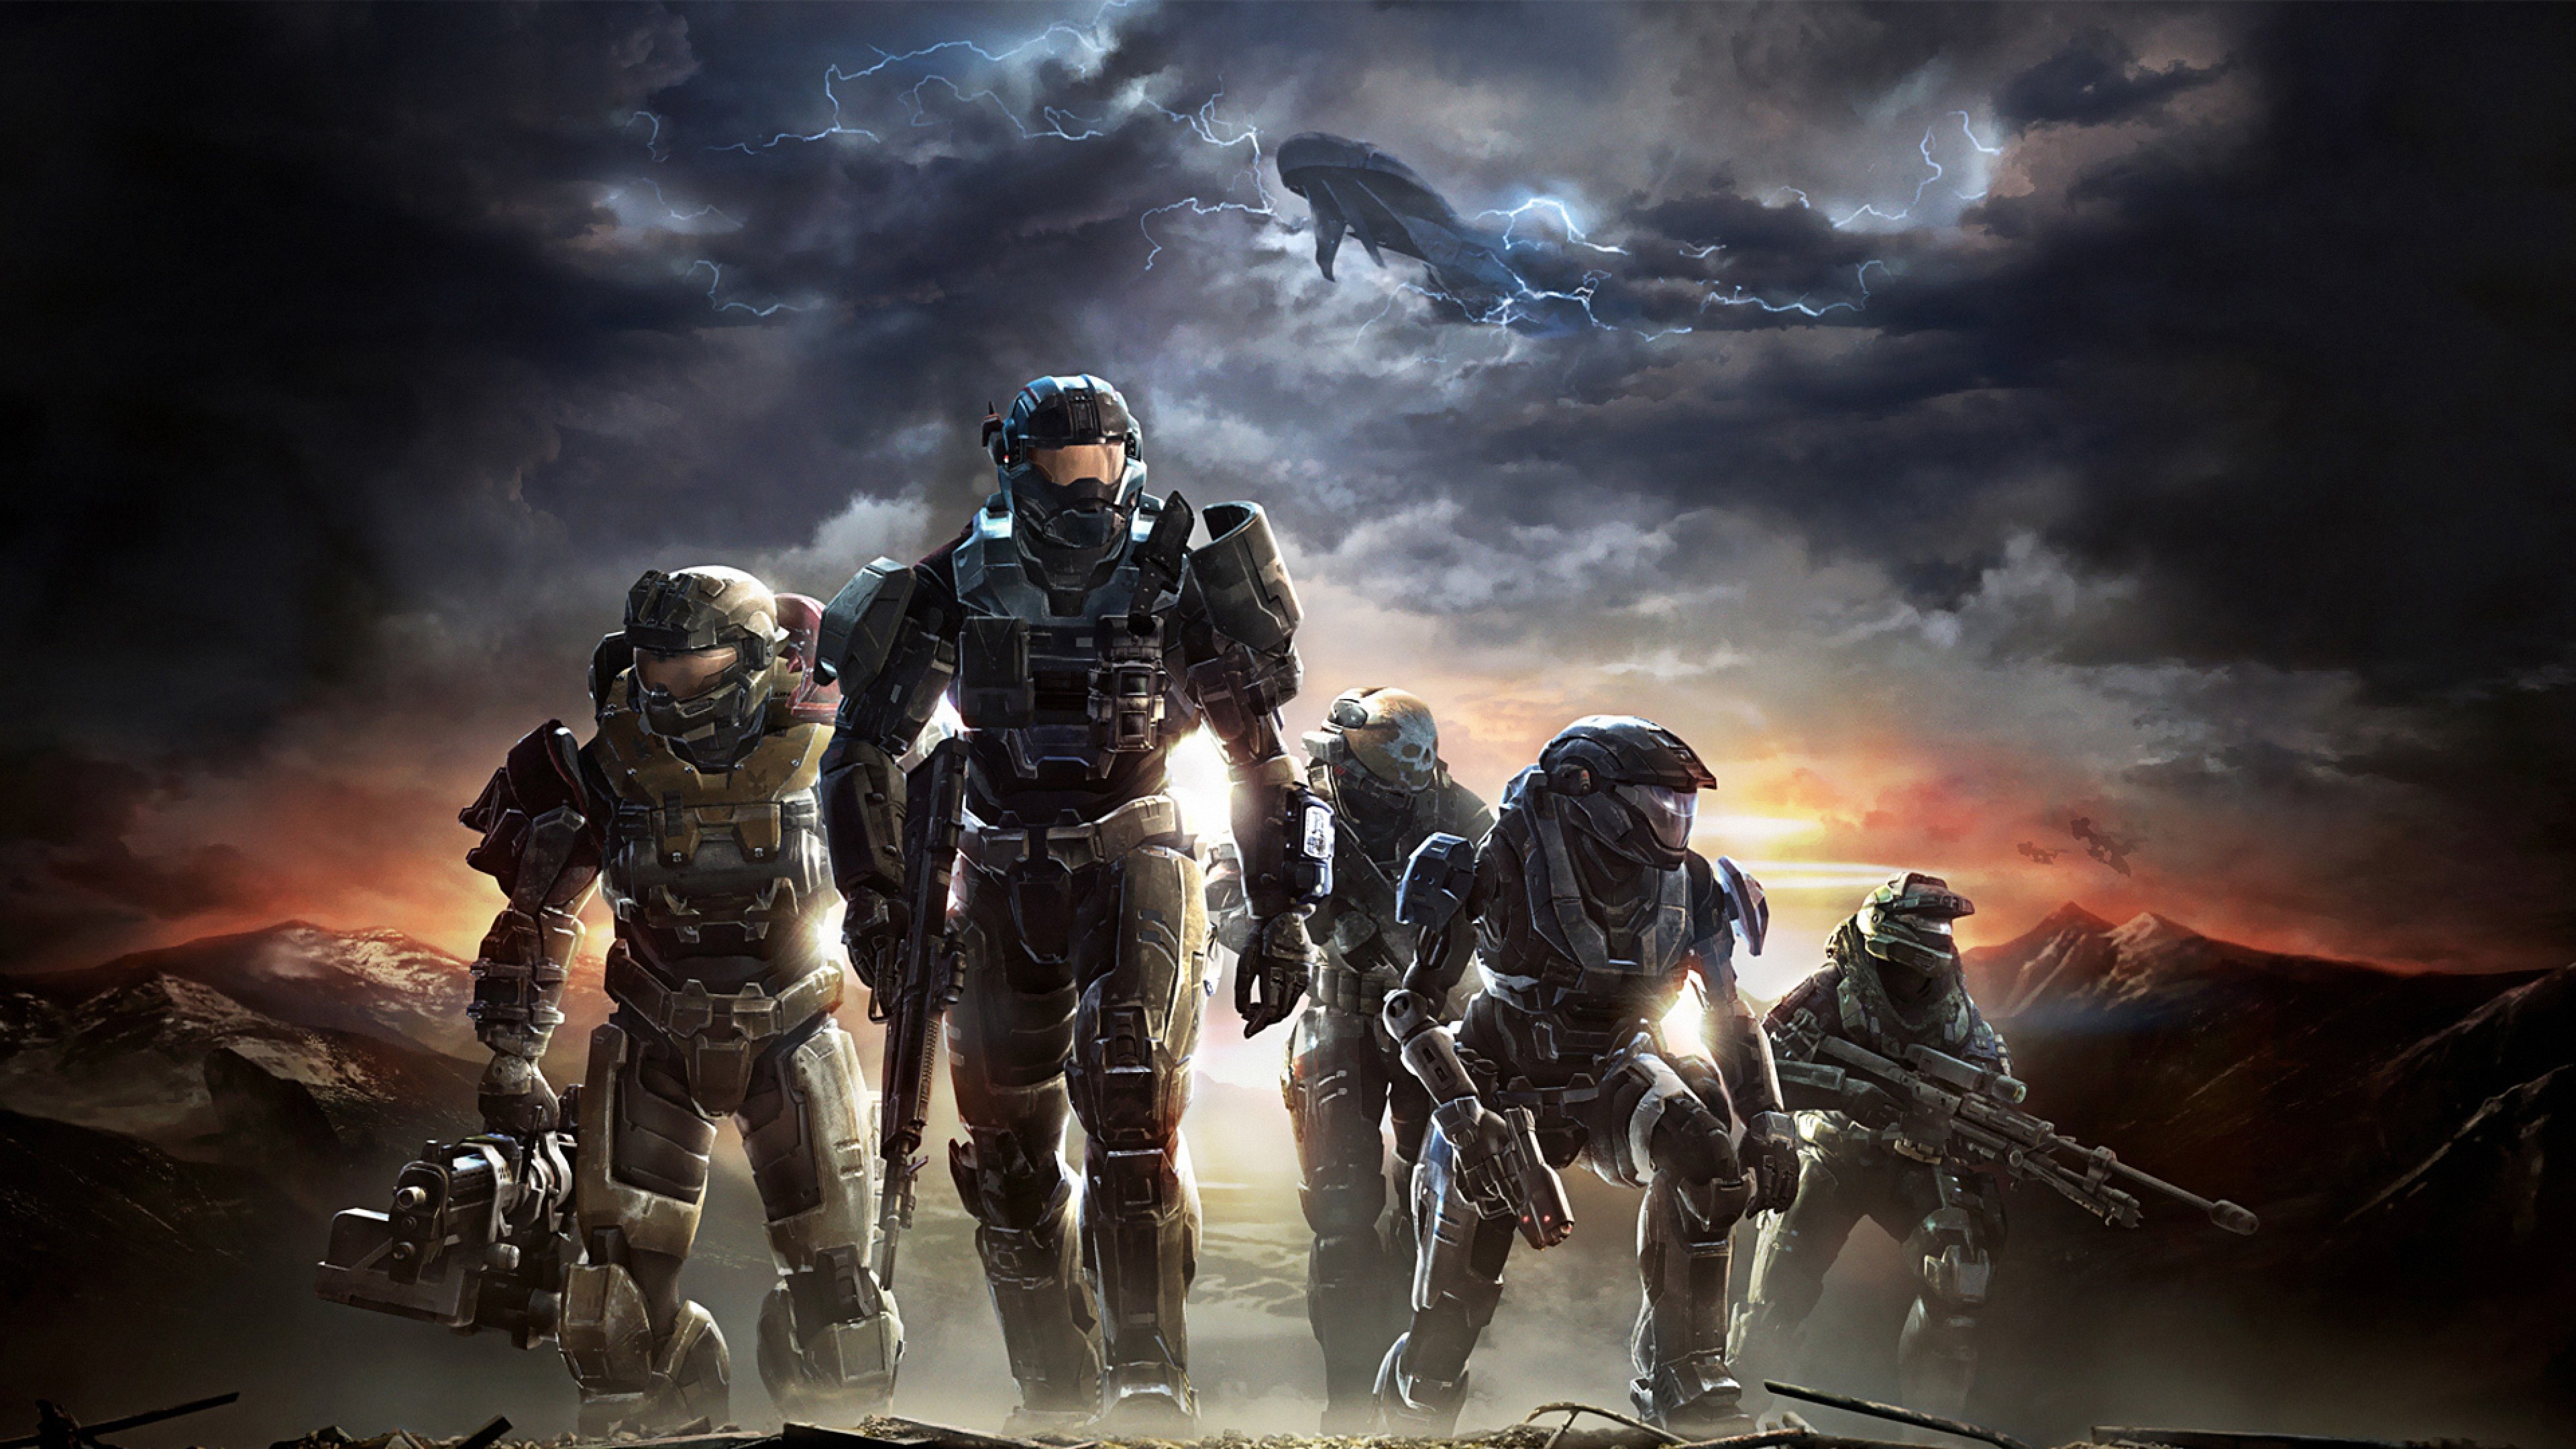 3840x2160 Download Wallpaper  halo soldiers sky clouds mountains 4K 